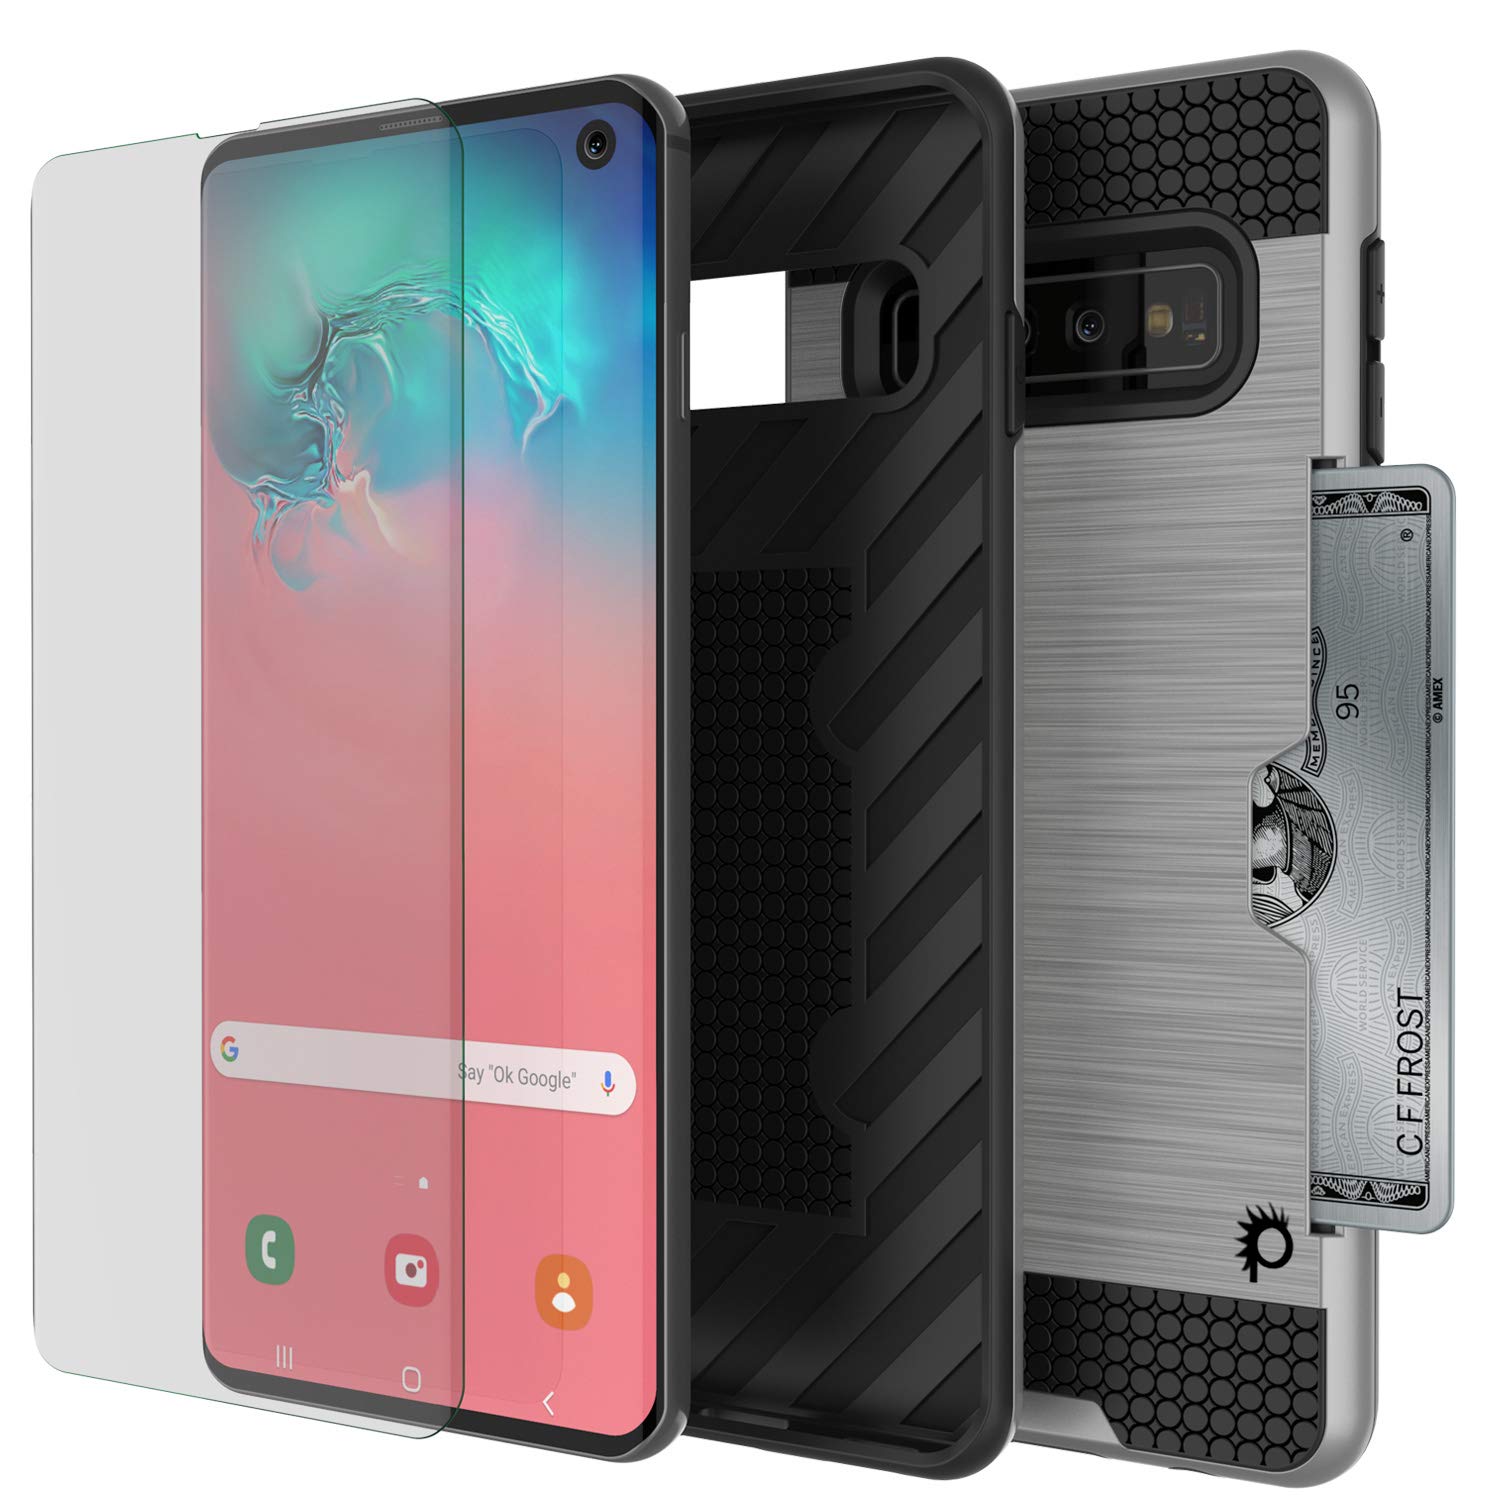 Galaxy S10 Case, PUNKcase [SLOT Series] [Slim Fit] Dual-Layer Armor Cover w/Integrated Anti-Shock System, Credit Card Slot [Silver]